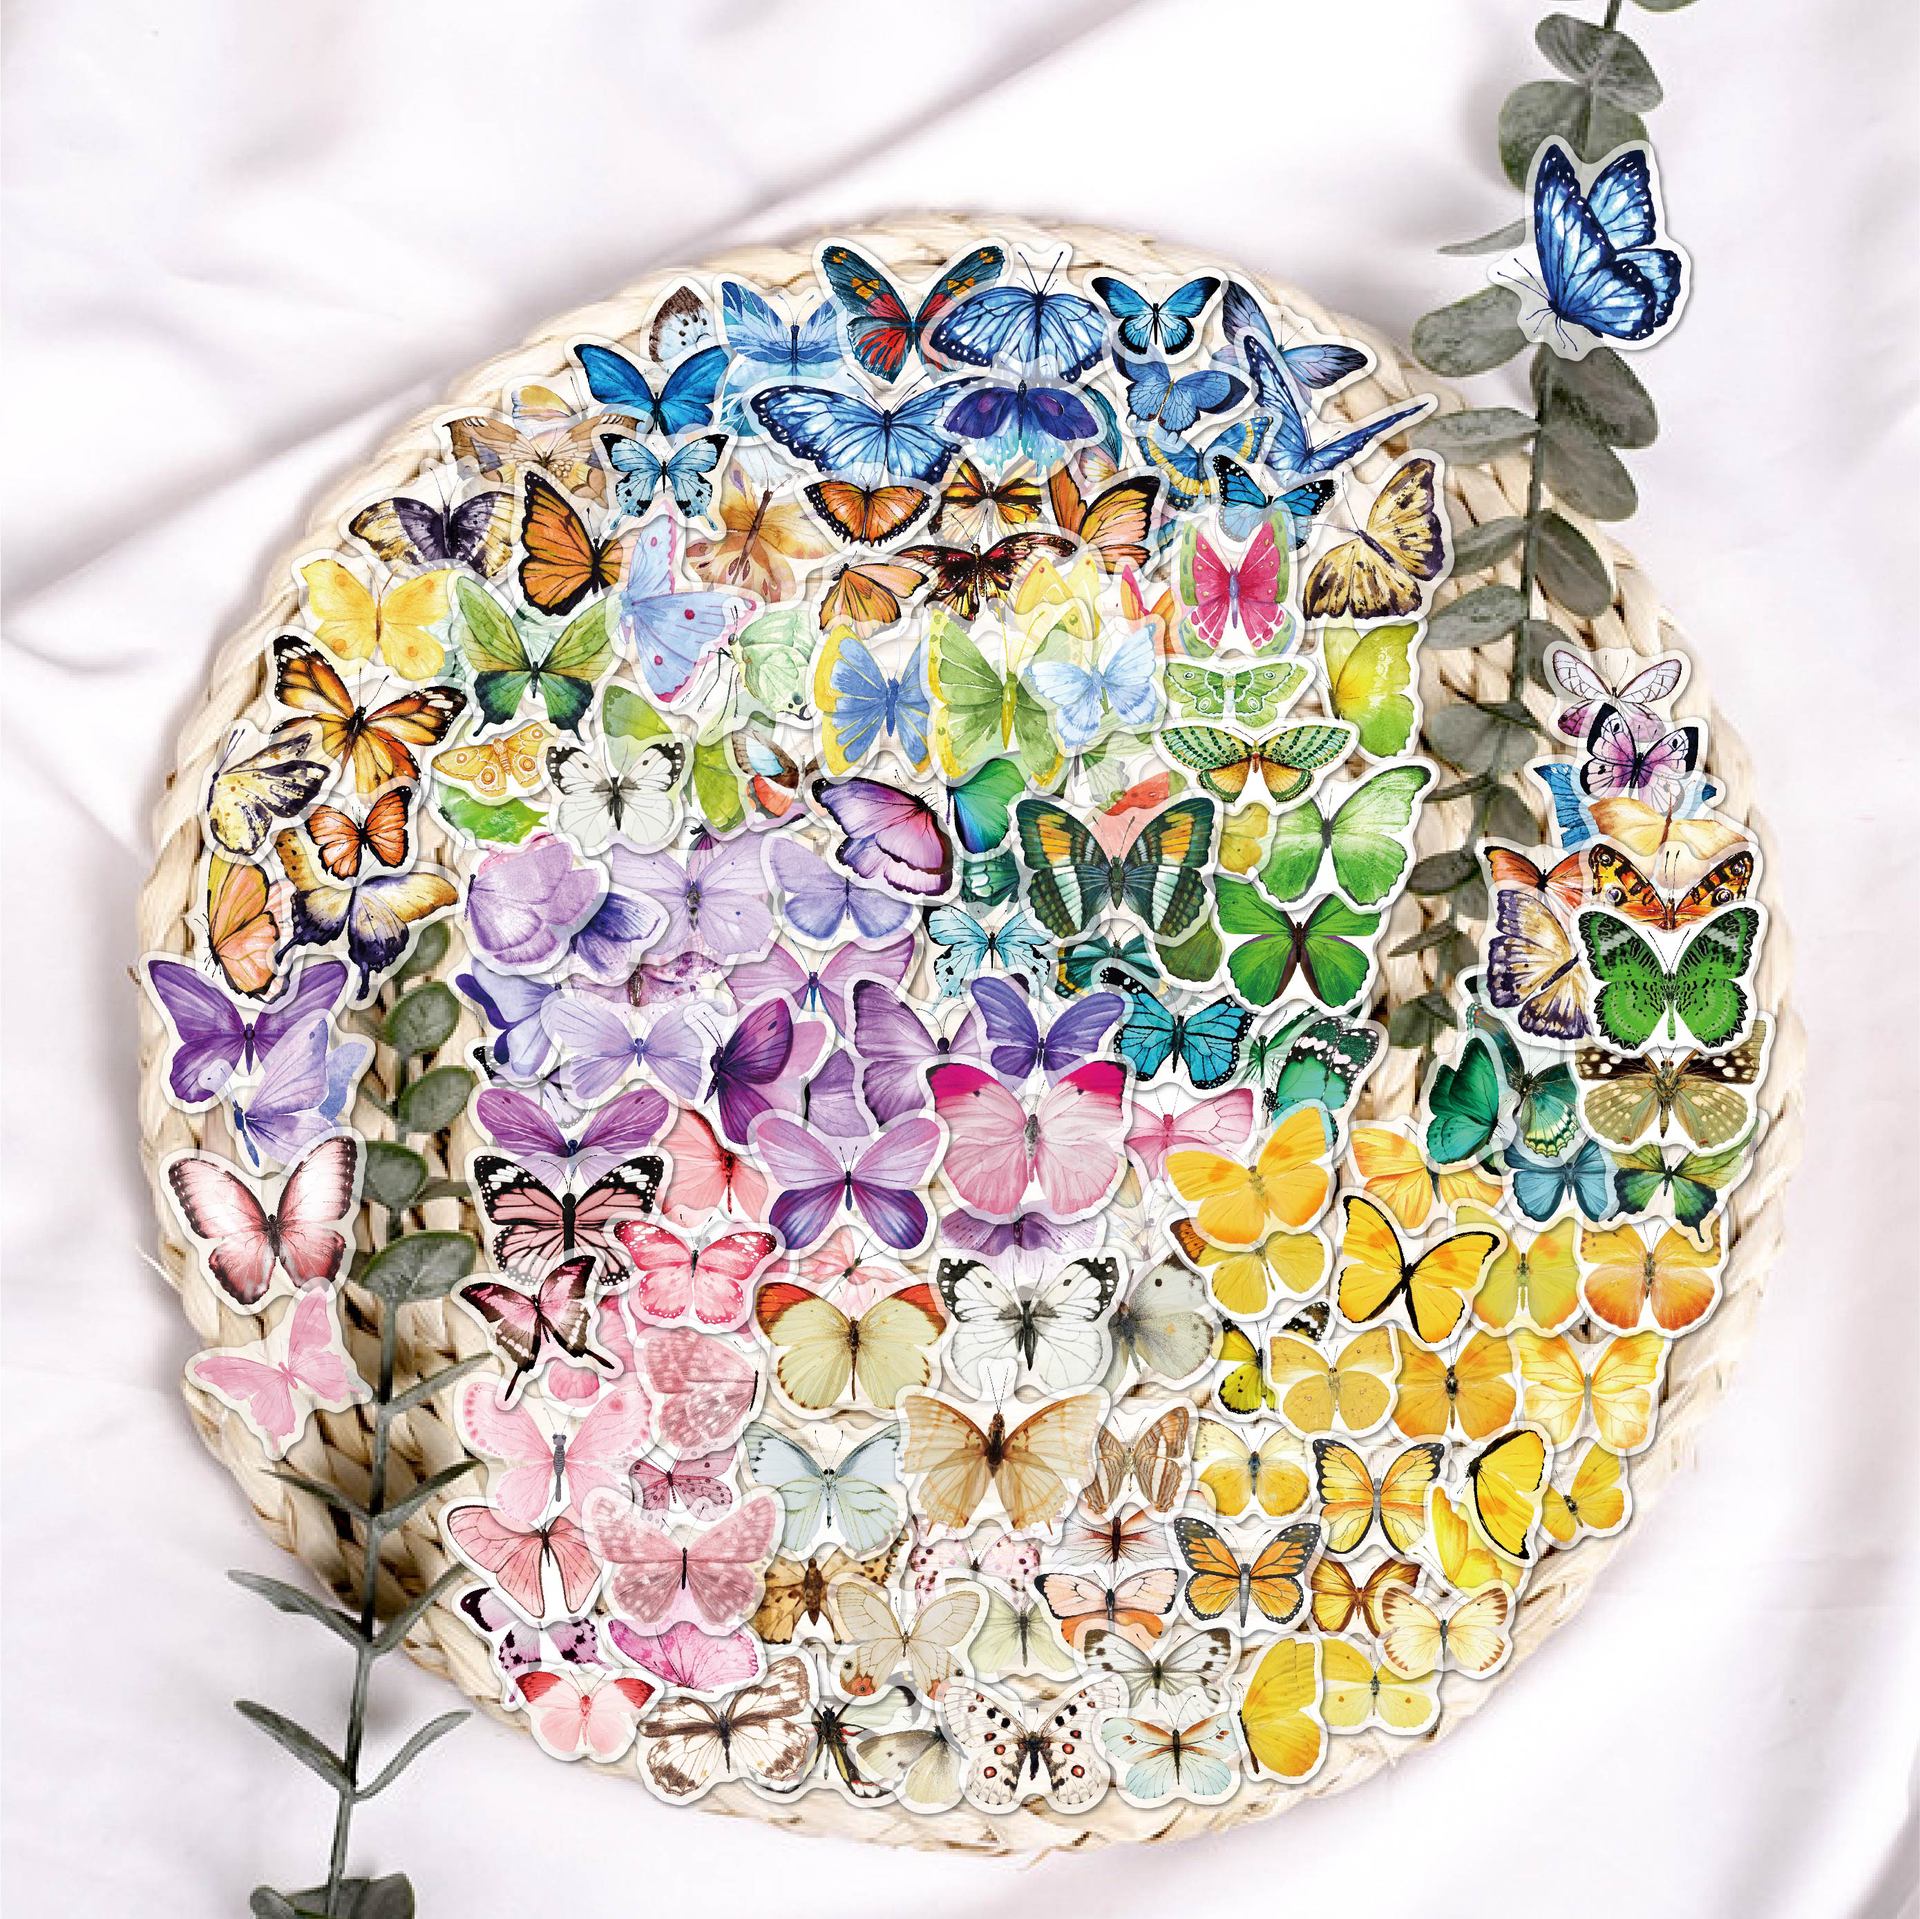 YASMEN Holographic Stickers, 90PCS Vintage Butterfly & Magic Transparent  Stickers, Resin Decorative Stickers for Scrapbooking, Bullet Junk Journal